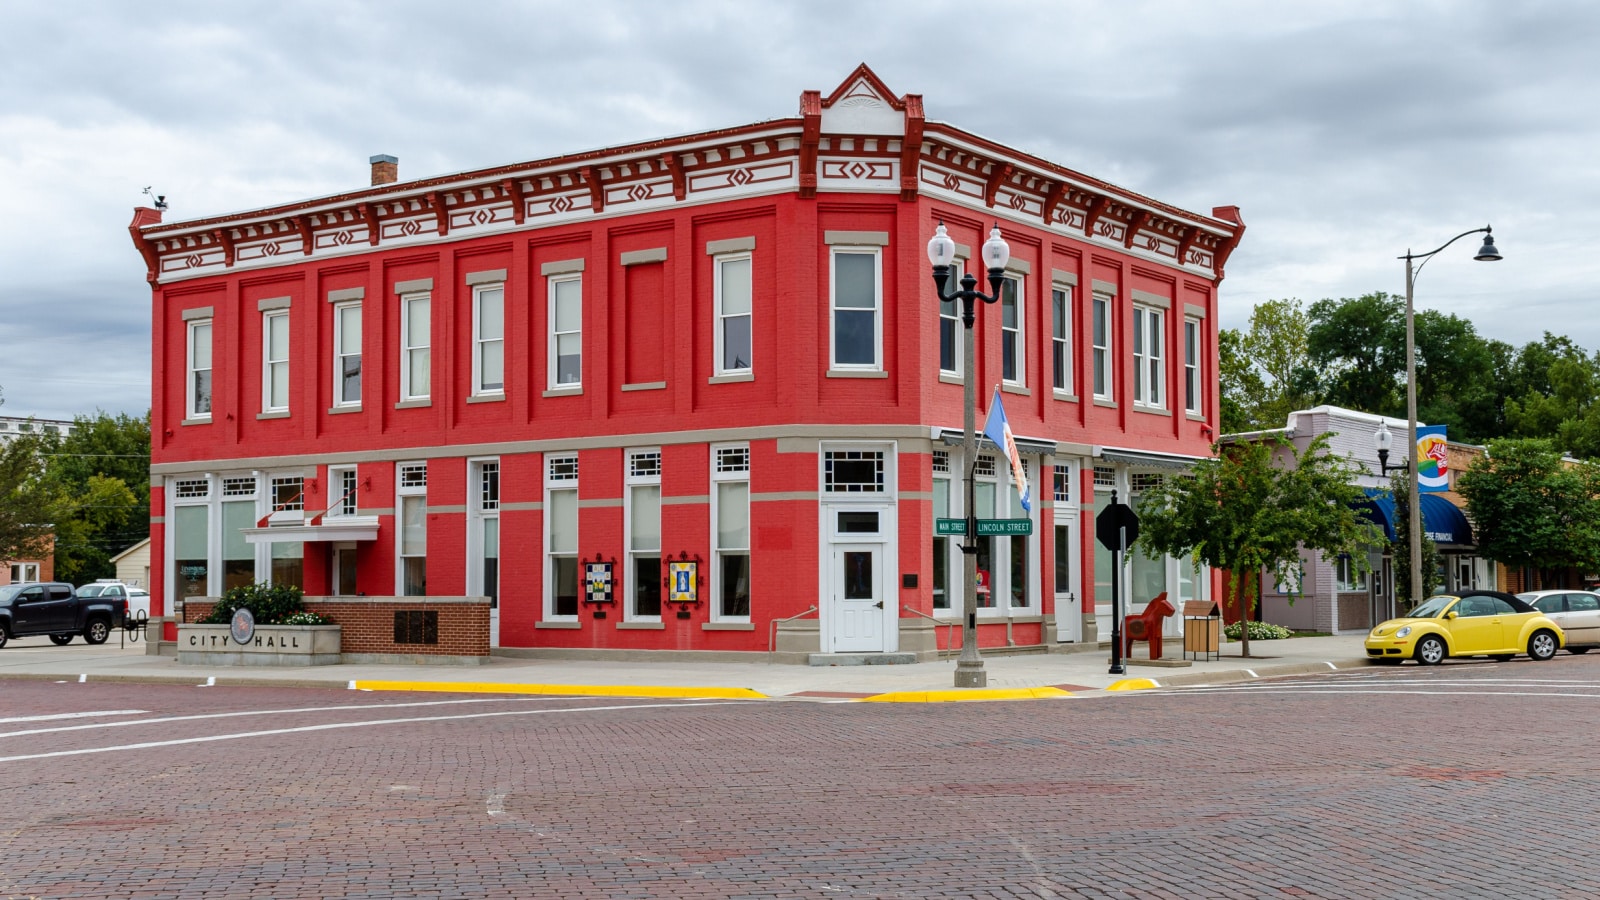 October, 2019, Lindsborg, Kansas, USA - The original Farmers State Bank building in Lindsborg, Kansas, is now home to City Hall and sports a bright red coat of paint.